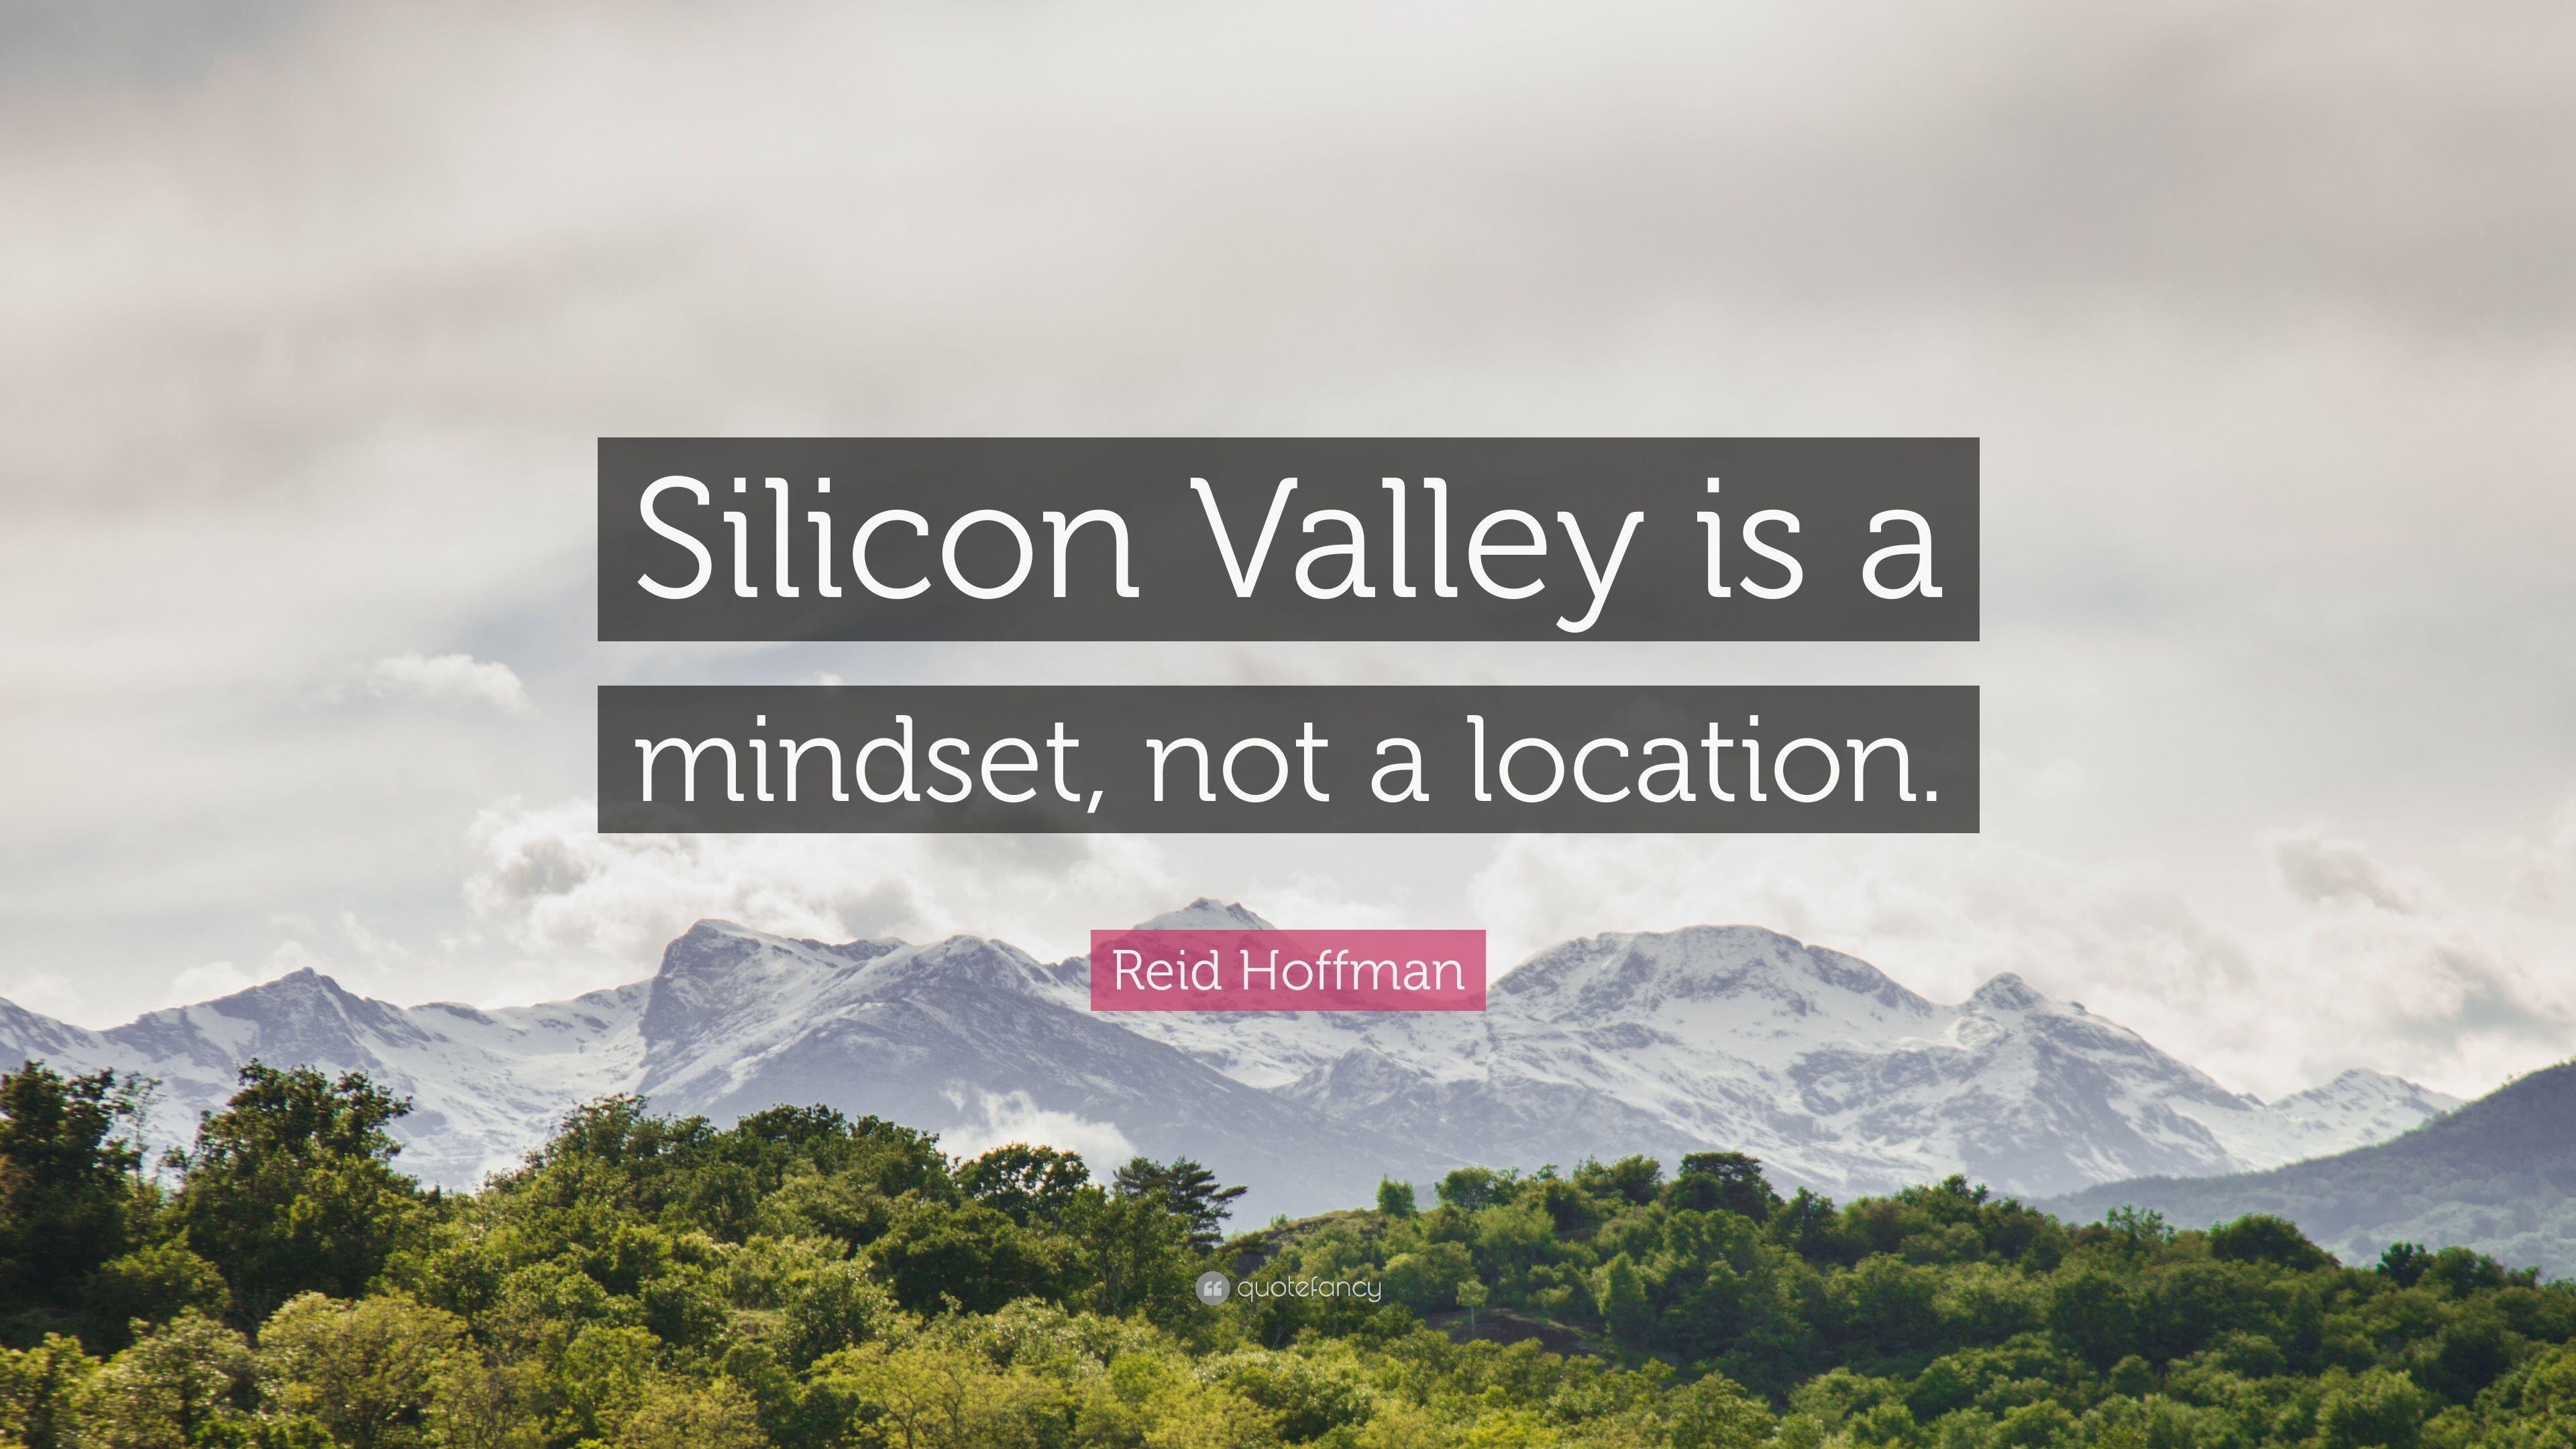 Reid Hoffman Quote: “Silicon Valley is a mindset, not a location